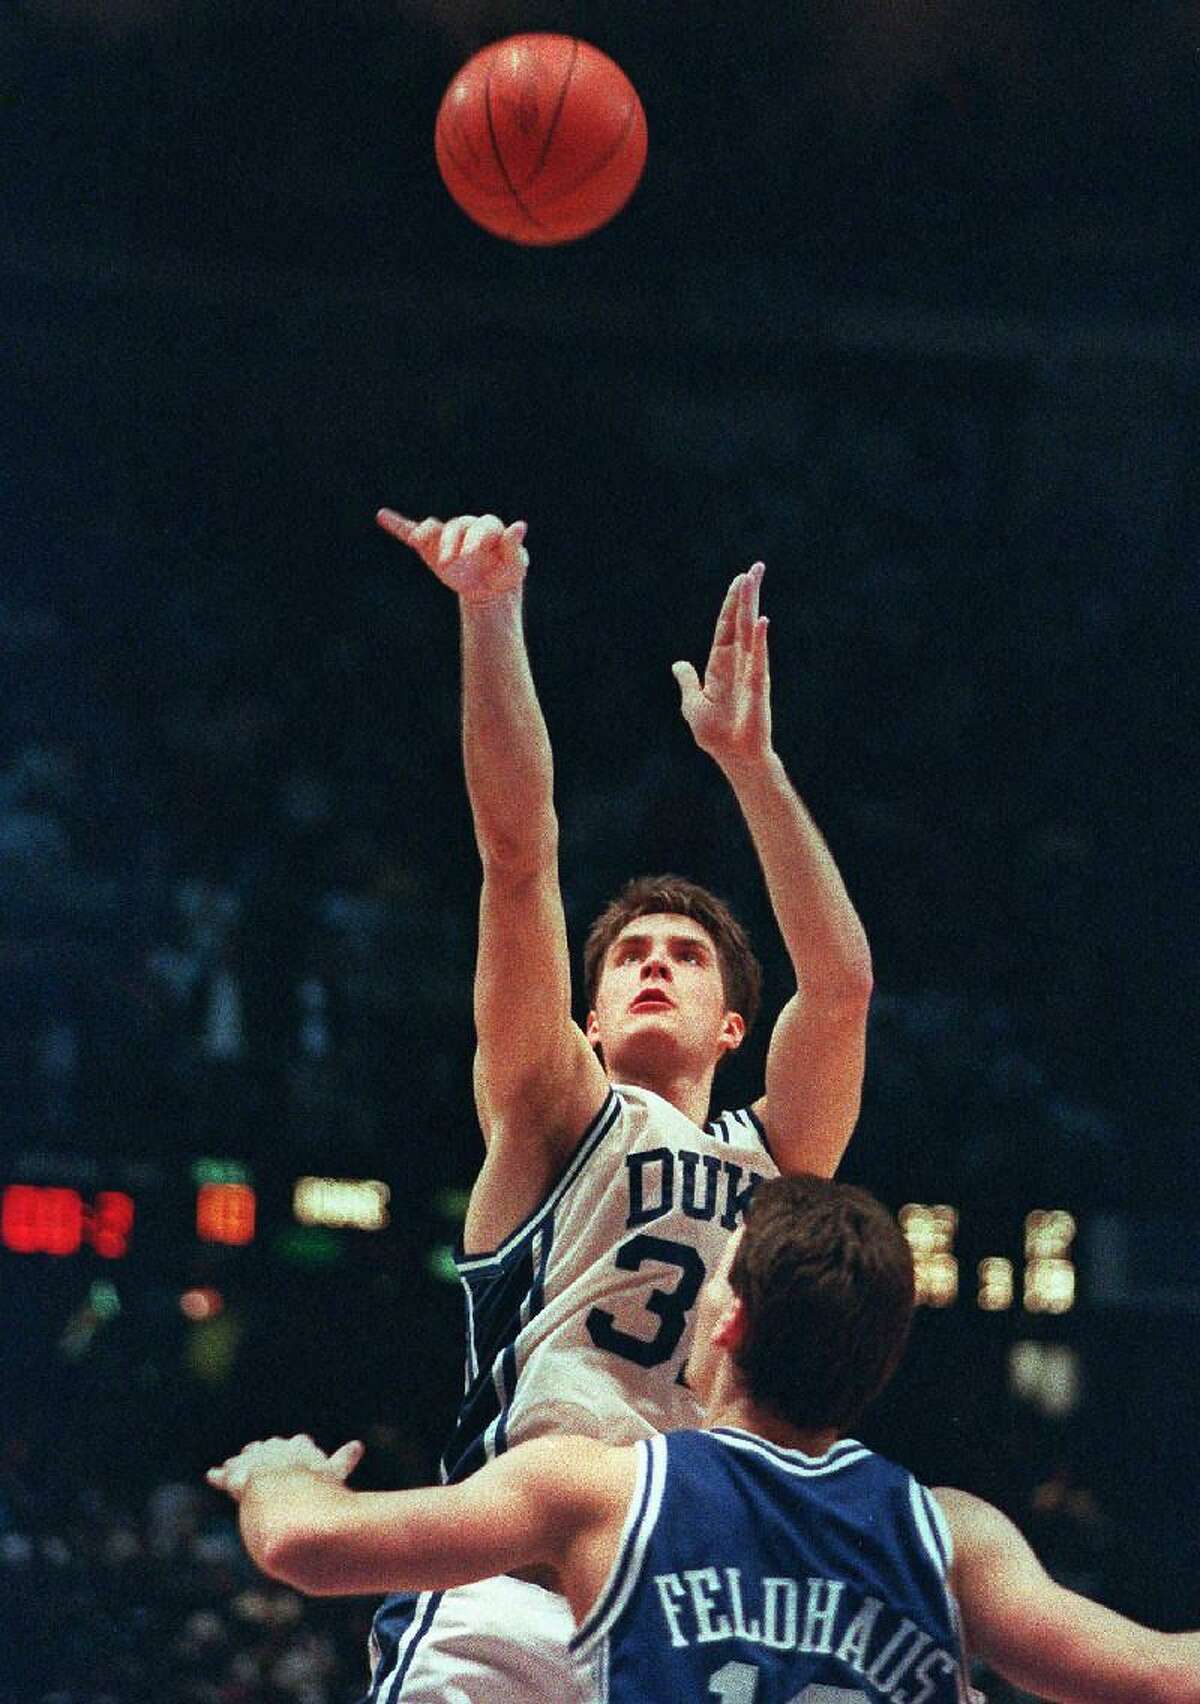 ASSOCIATED PRESS In this March 28, 1992 file photo, Duke's Christian Laettner shoots the game-winning basket in overtime over Kentucky's Deron Feldhaus to win the East Regional final in Philadelphia. Duke beat Kentucky 104-103. Laettner says it doesn't feel like it has been 20 years since his famous shot lifted Duke to victory, in part because the much-celebrated play still is replayed so often on TV. As Duke is back for another postseason run, Laettner now is far removed from that national spotlight as a new assistant coach for the NBA D-League Fort Wayne Mad Ants.